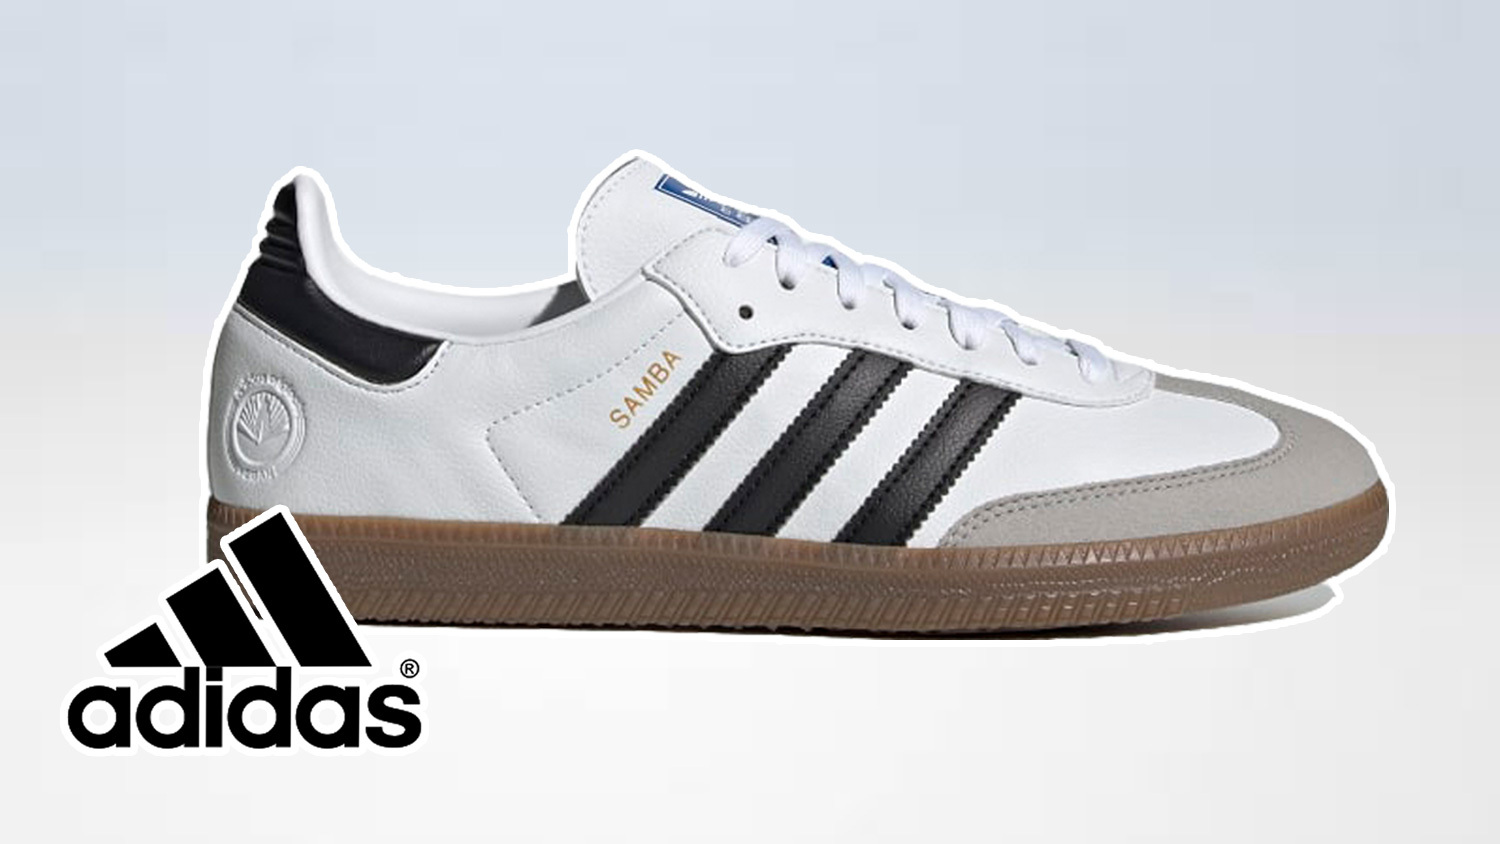 Are Adidas Shoes Real Leather?